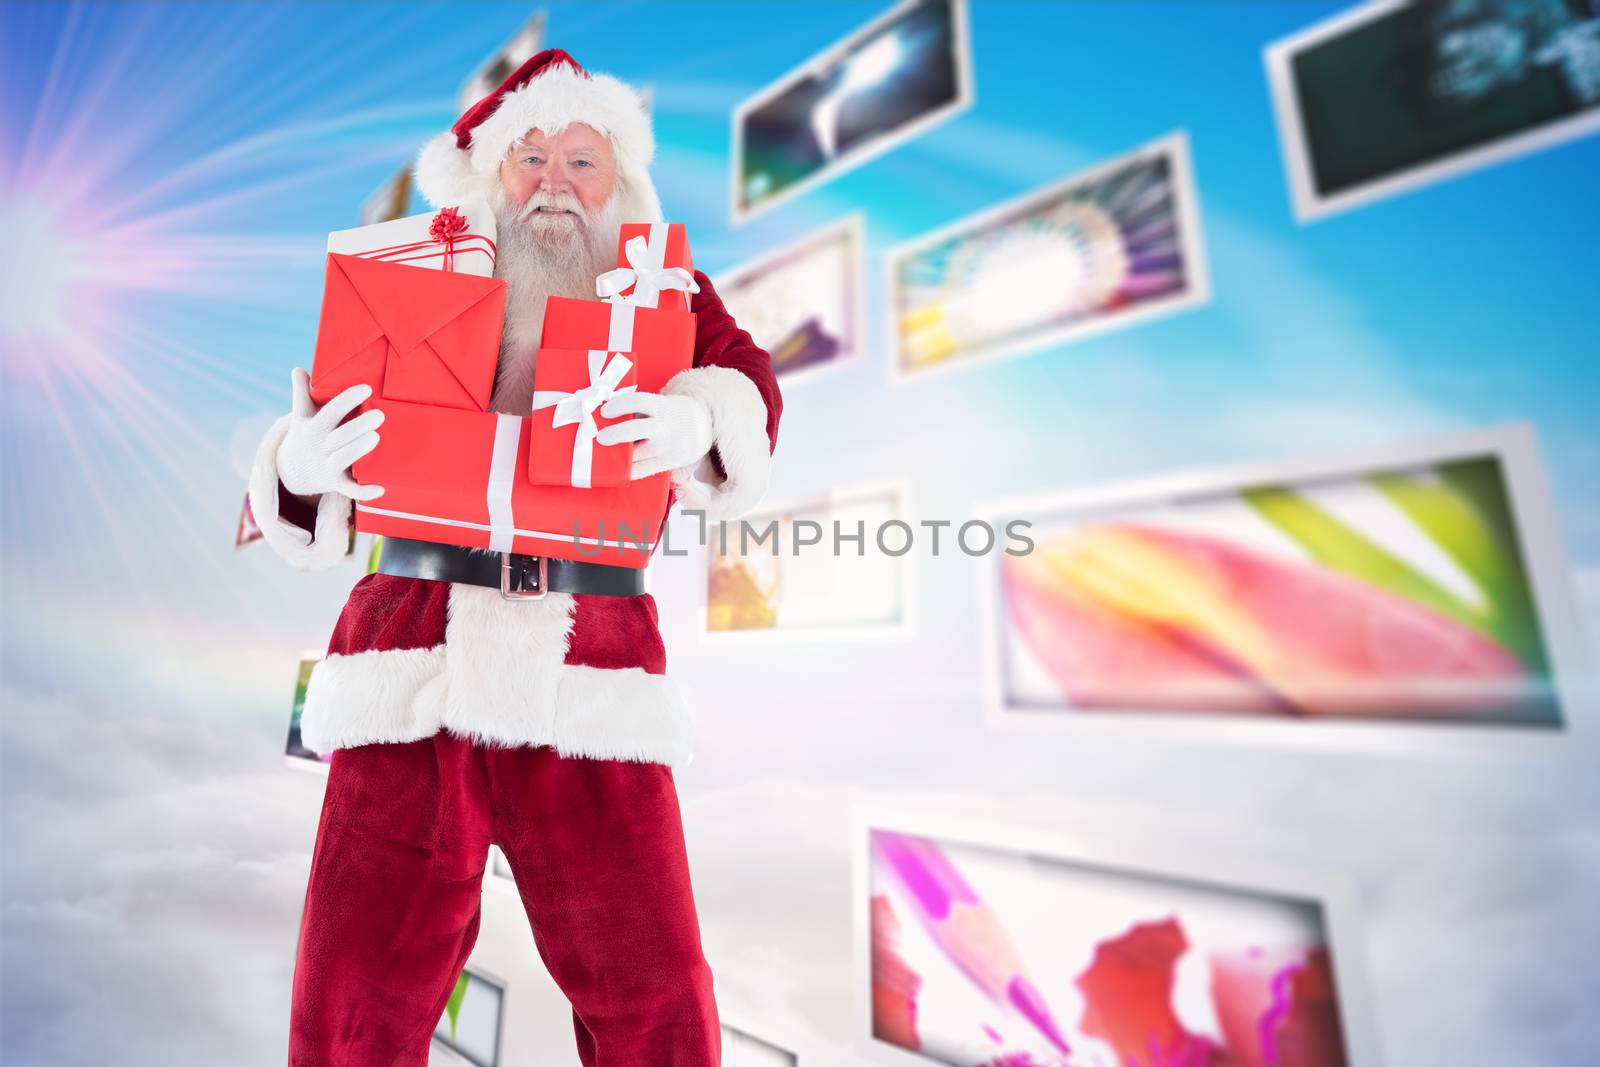 Santa carries a few presents against screen collage showing lifestyle images